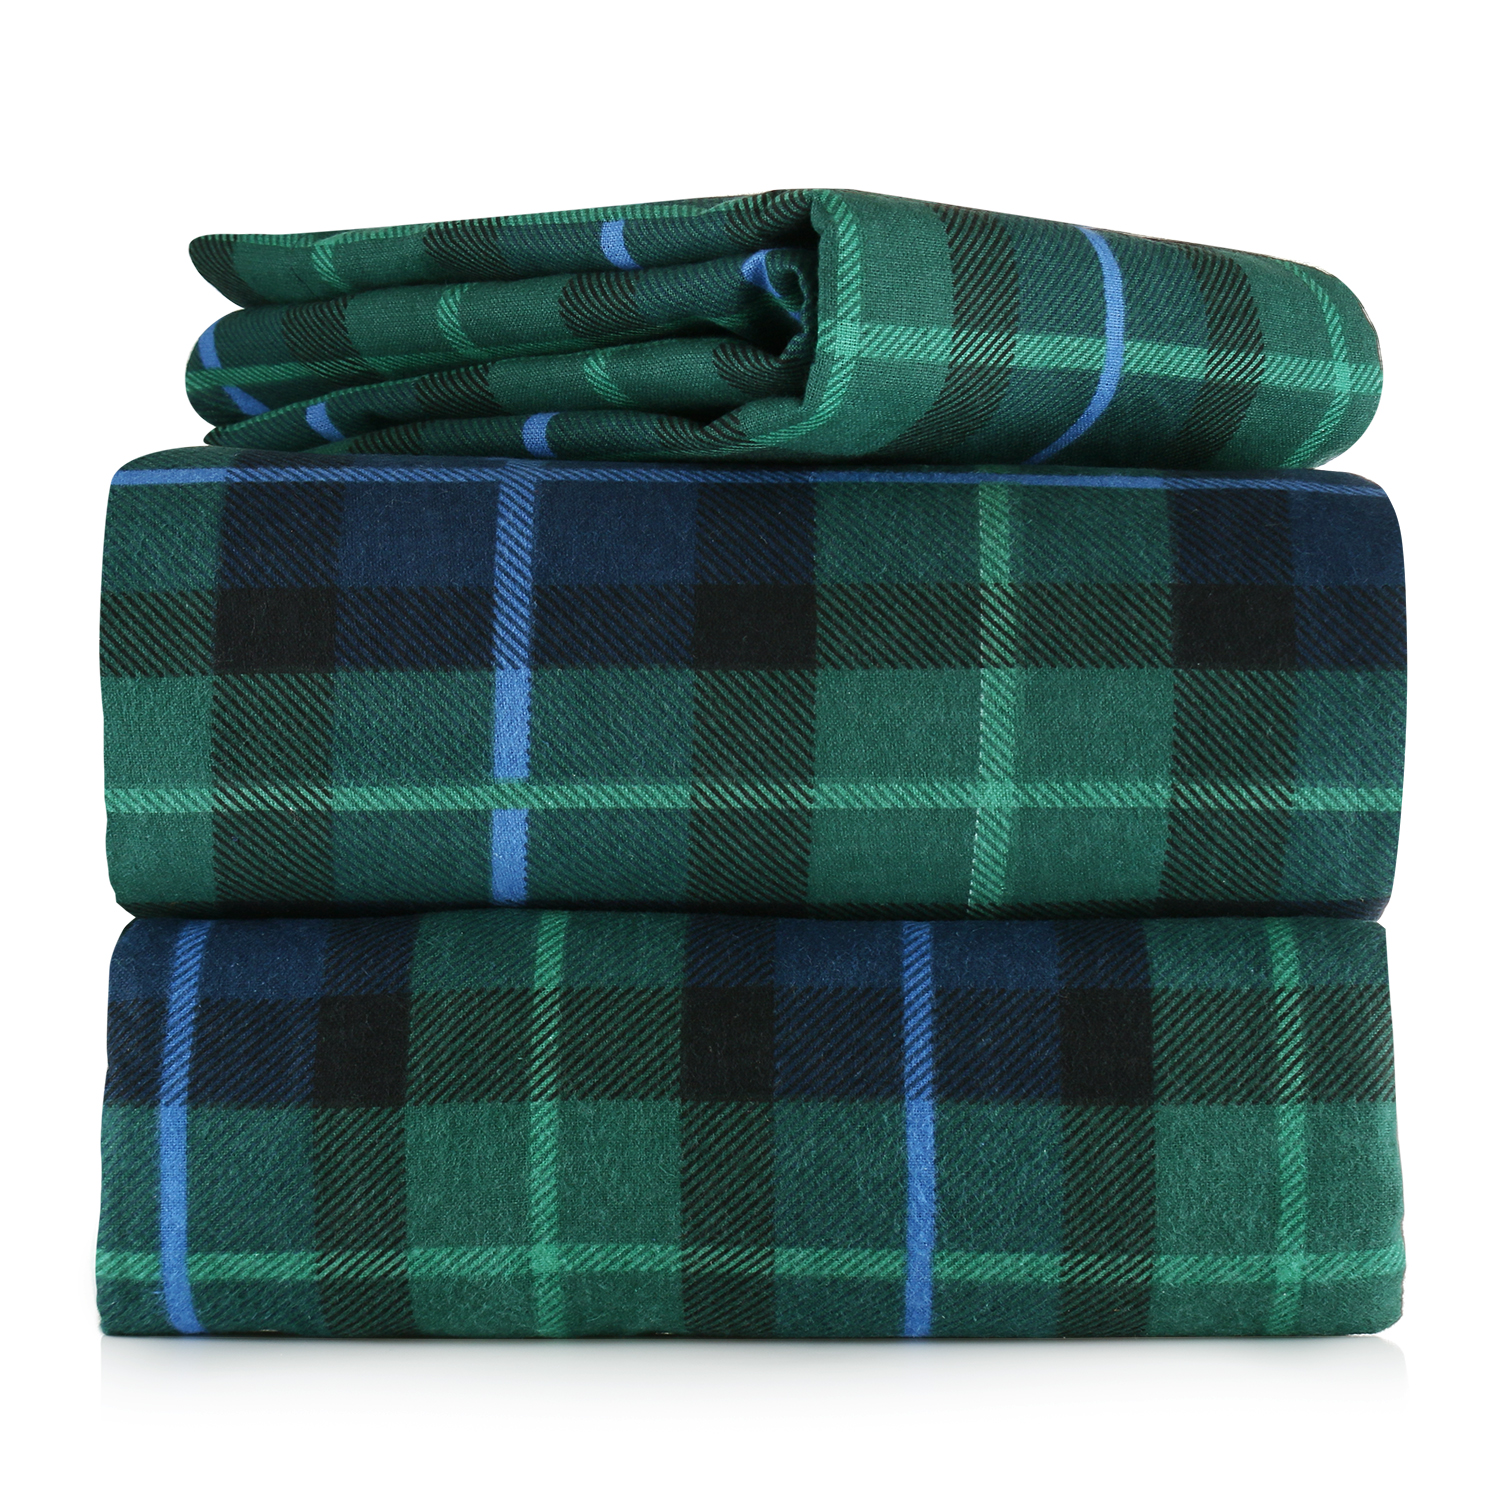 Tartan Green, Double 100% BRUSHED COTTON FLANNEL TARTAN CHECK SHEET SET FITTED SHEET FLAT SHEET PILLOW CASES SINGLE DOUBLE KING SIZE BED SHEETS 